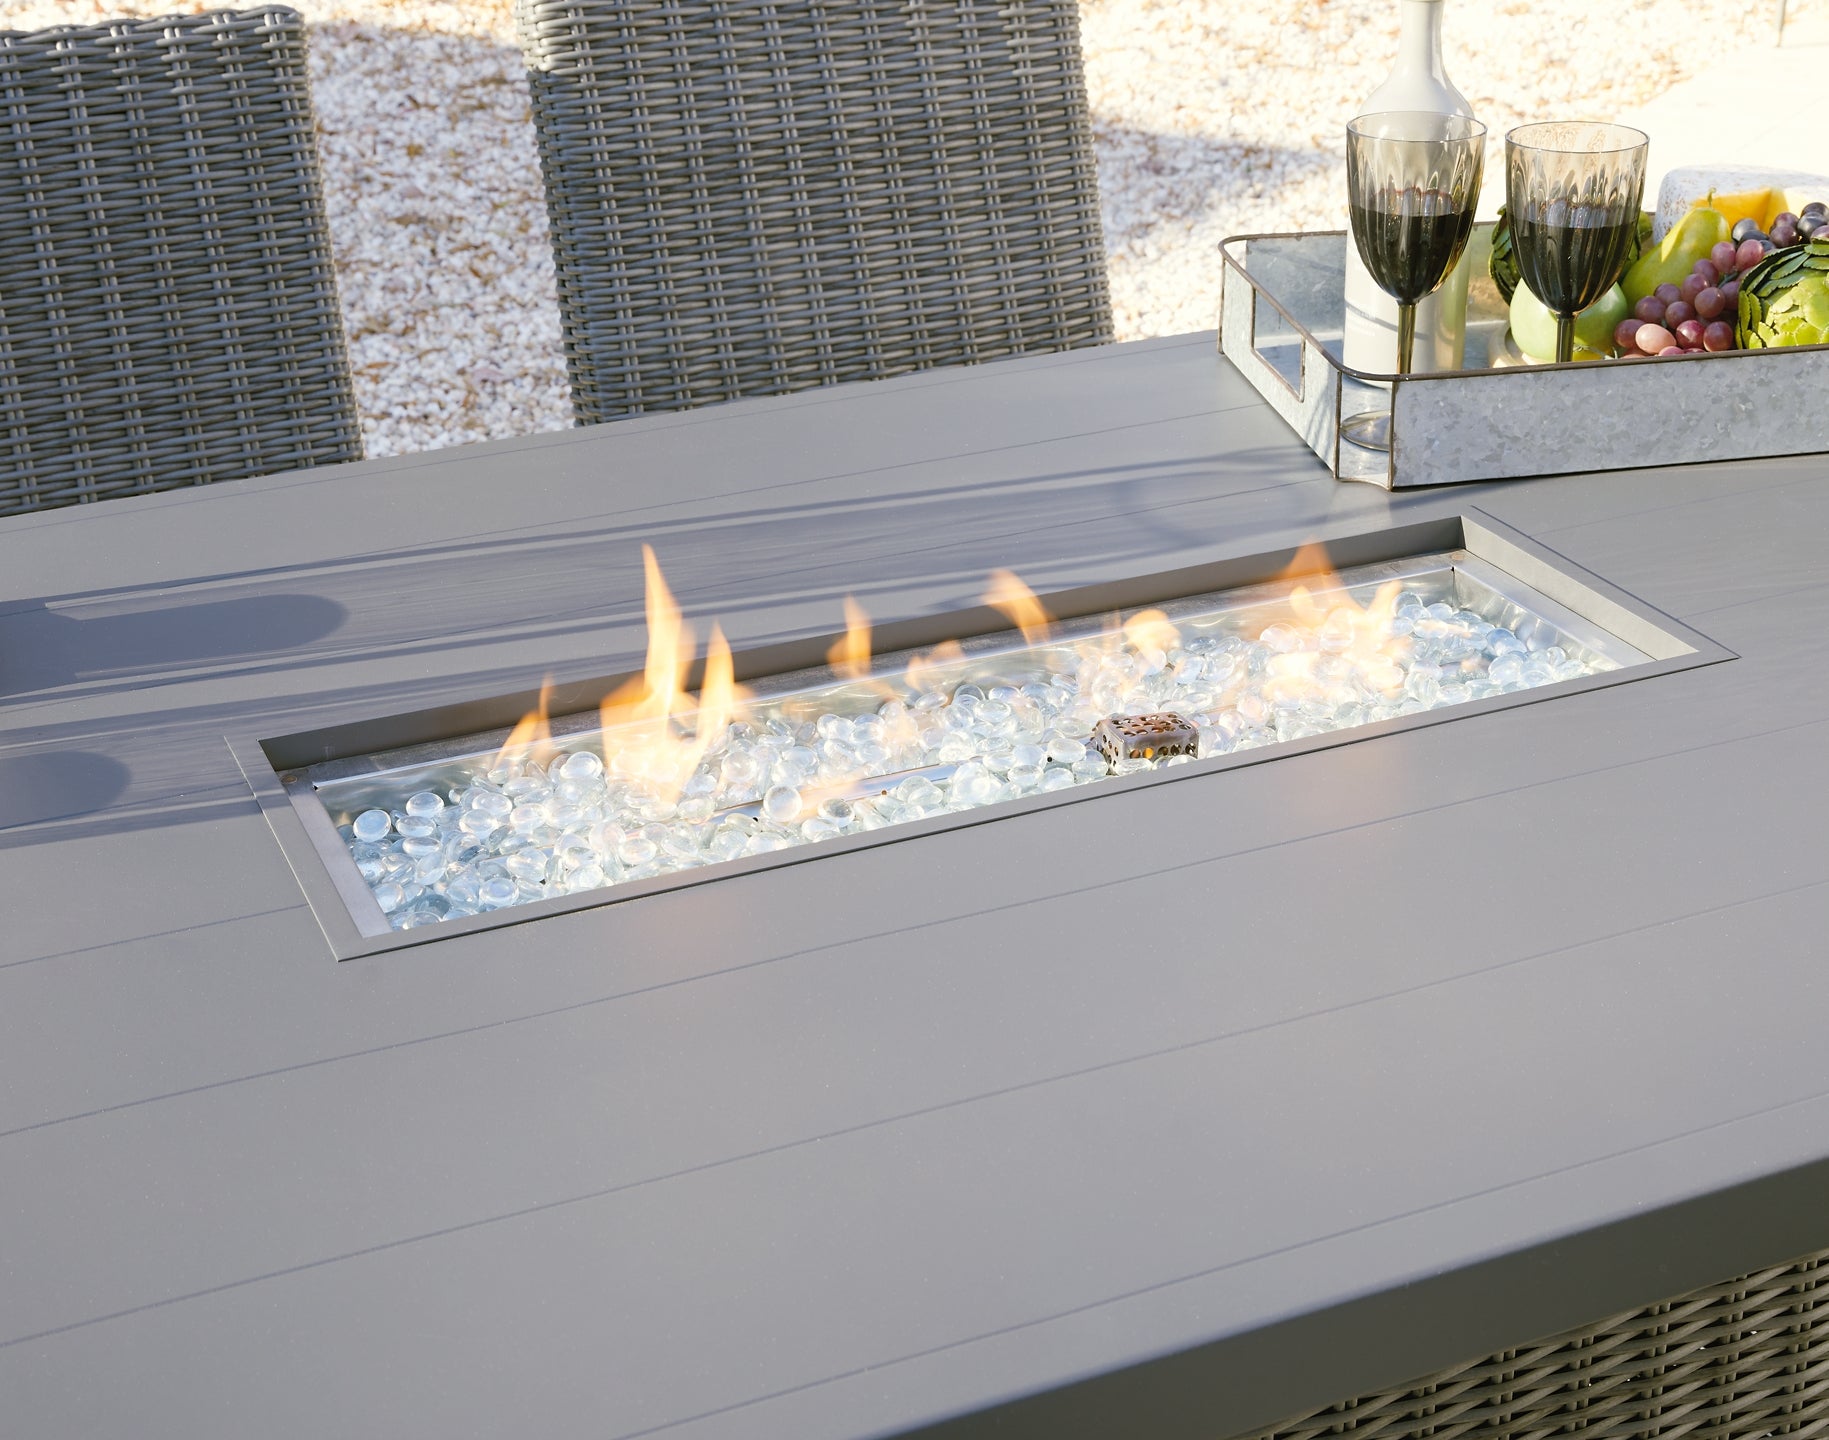 Palazzo RECT Bar Table w/Fire Pit at Cloud 9 Mattress & Furniture furniture, home furnishing, home decor